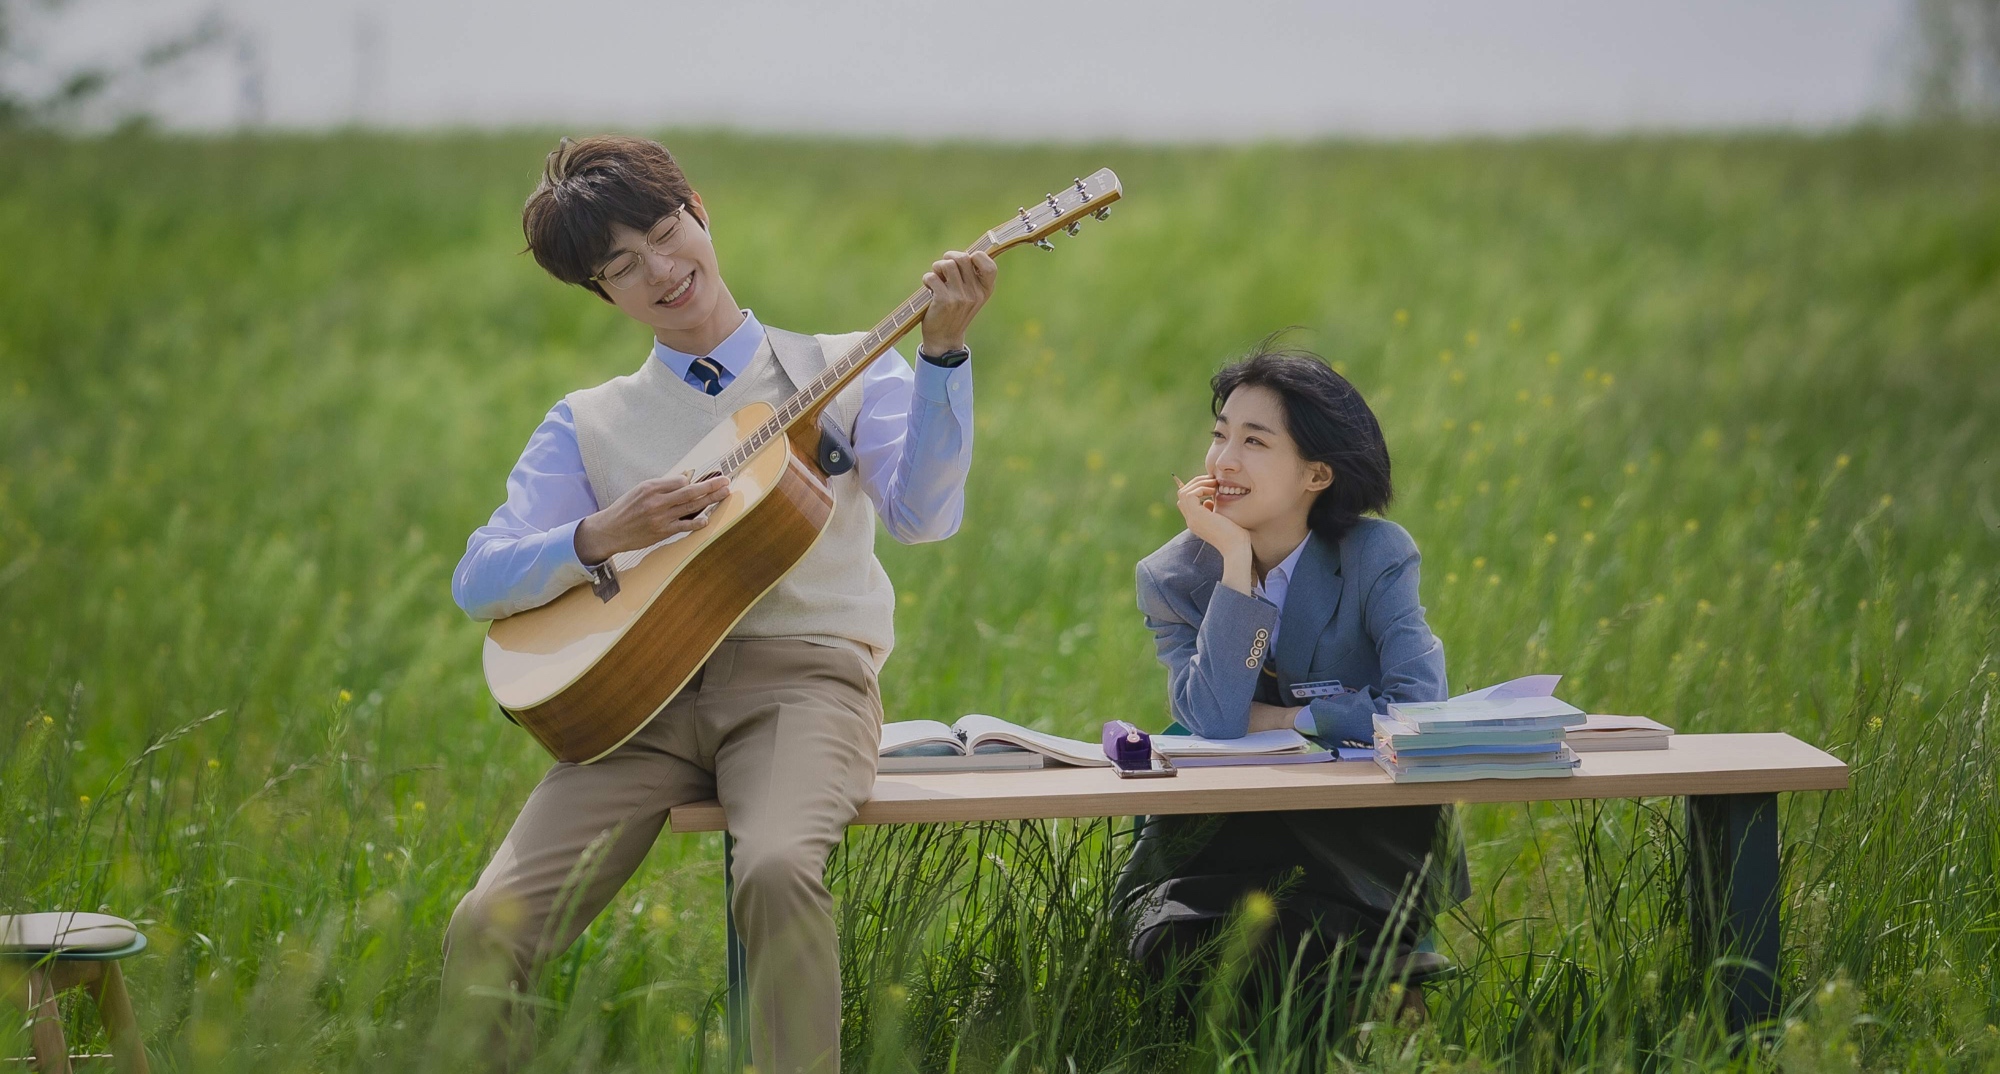 Hwang In-yeop and Choi Sung-run in 'The Sound of Magic' in a meadow field.